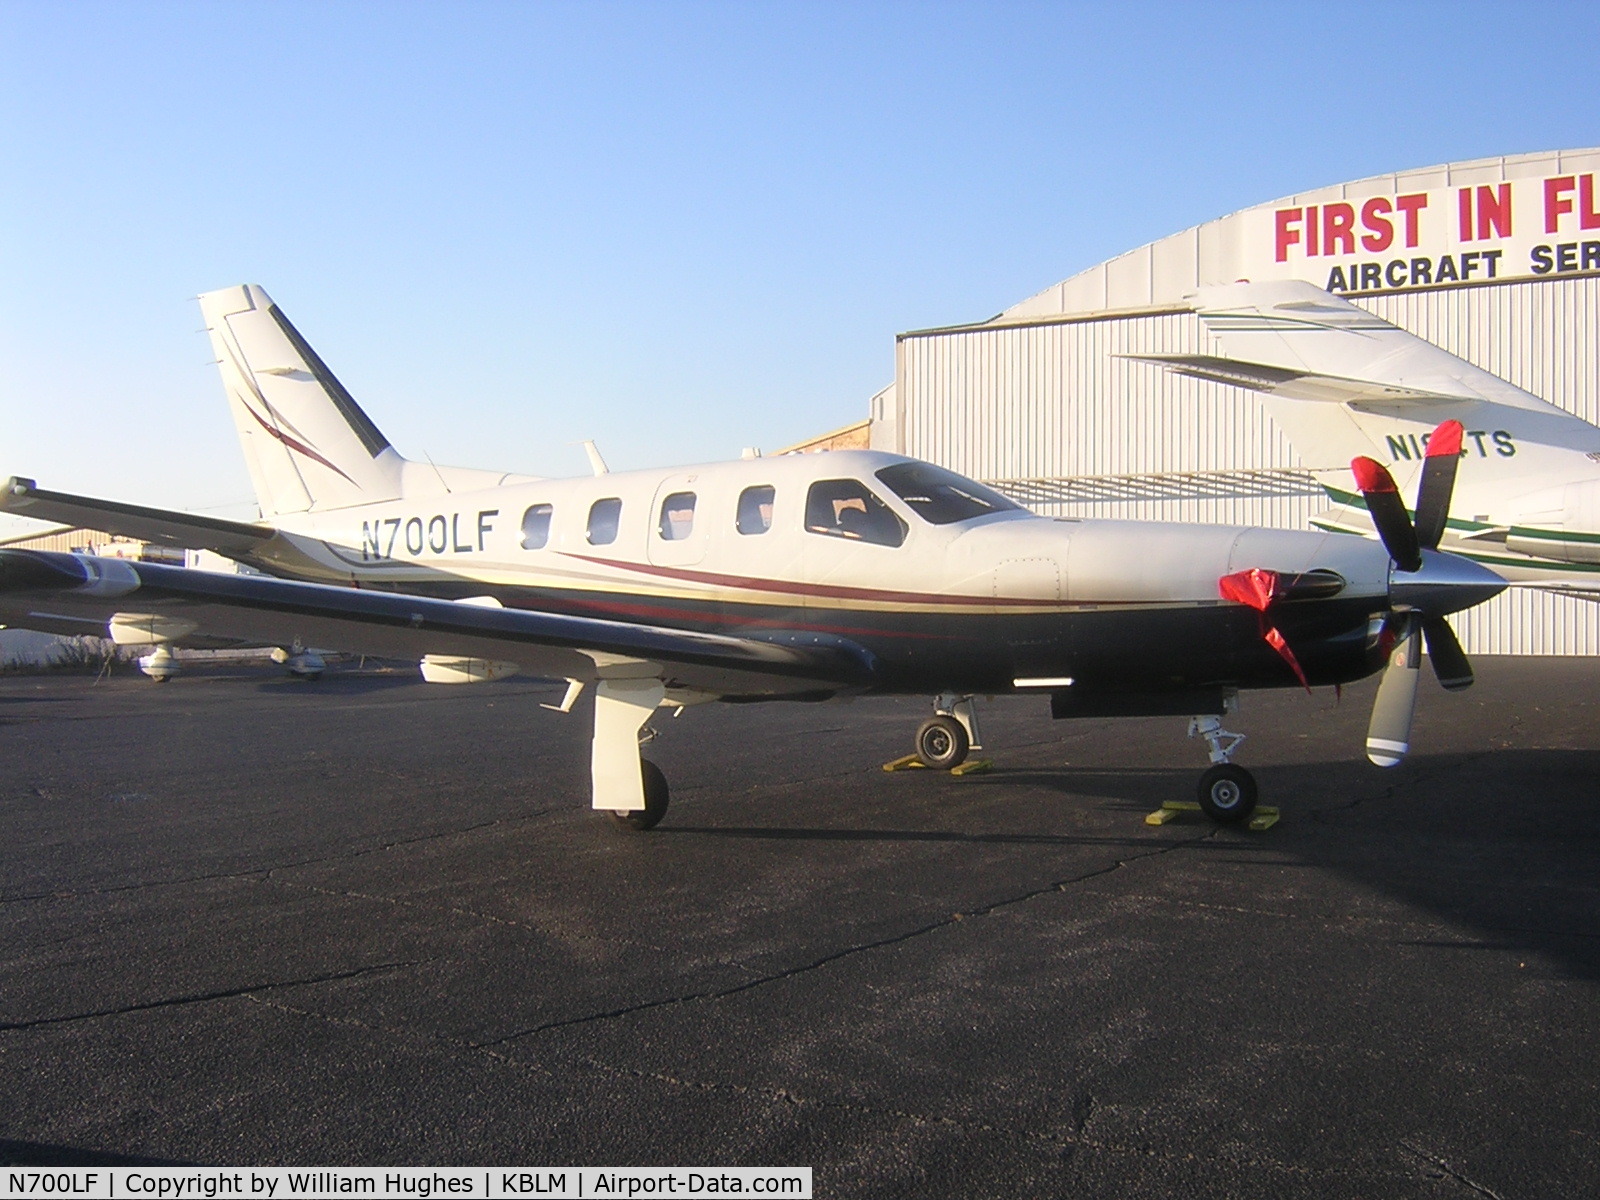 N700LF, 2003 Socata TBM-700 C/N 270, sitting on the ramp ready to depart to Ocean Reef Club in Florida (07FA) private airport